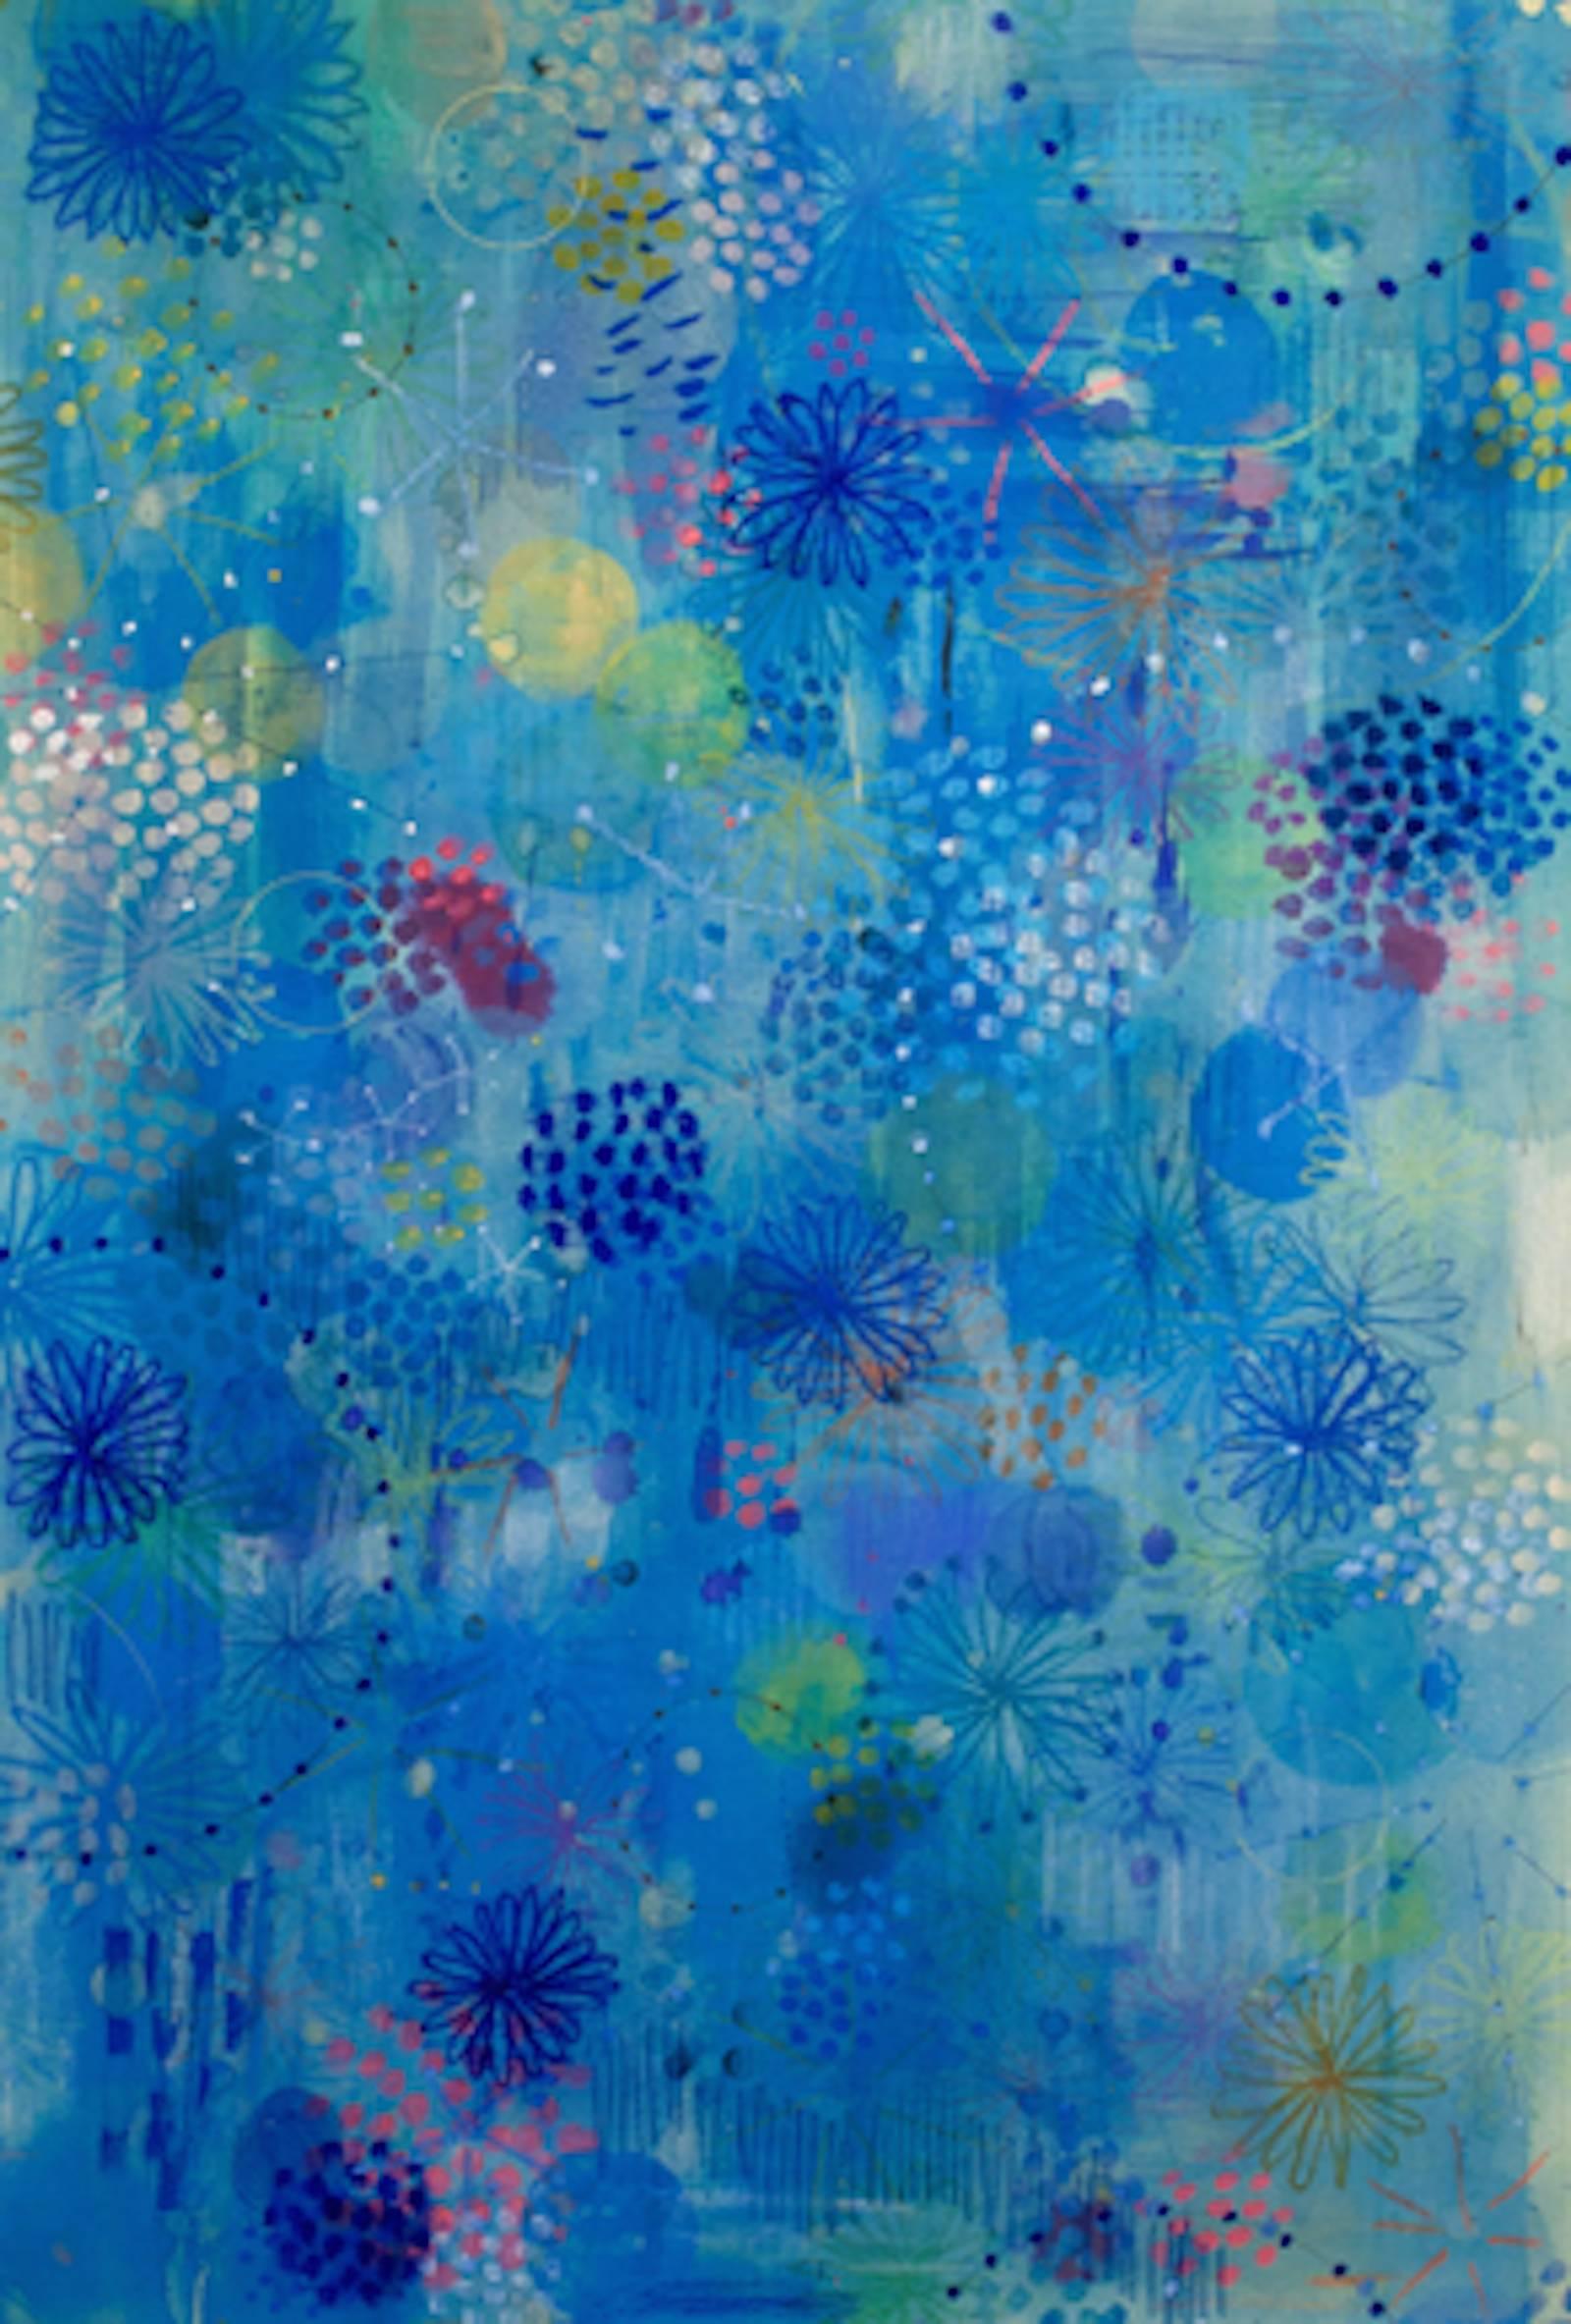 Daru Jung Hyang Kim Abstract Painting - Blue Flutter 2 - abstract nature inspired contemporary oil painting